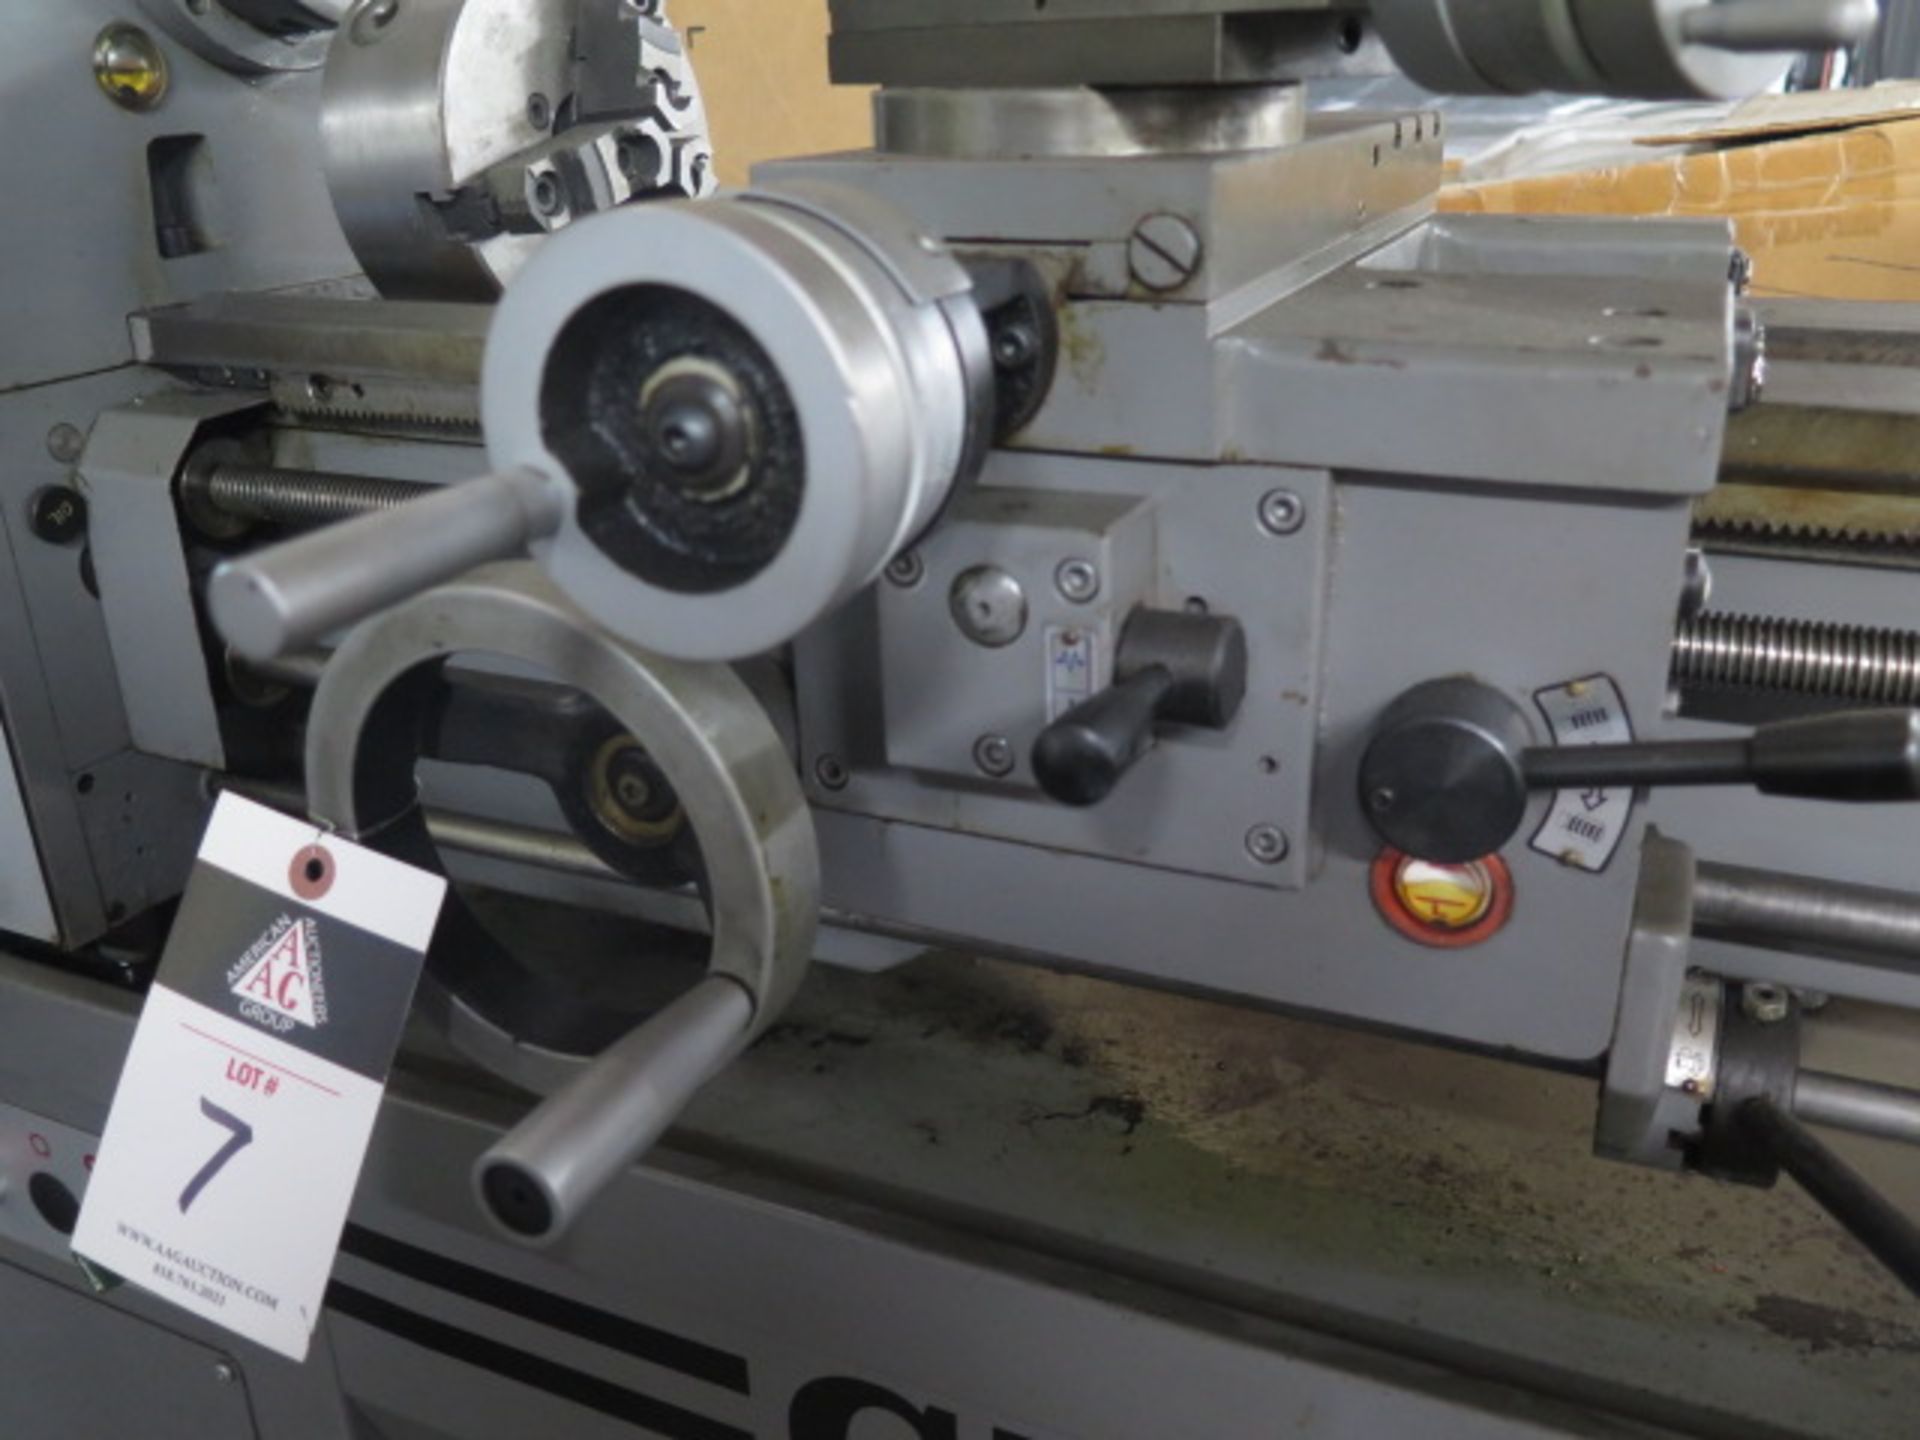 1990 Jet GH-1340R 13” x 40” Gap Bed Lathe s/n D9007-223R w/ 70-2000 RPM, Inch/mm, SOLD AS IS - Image 15 of 18